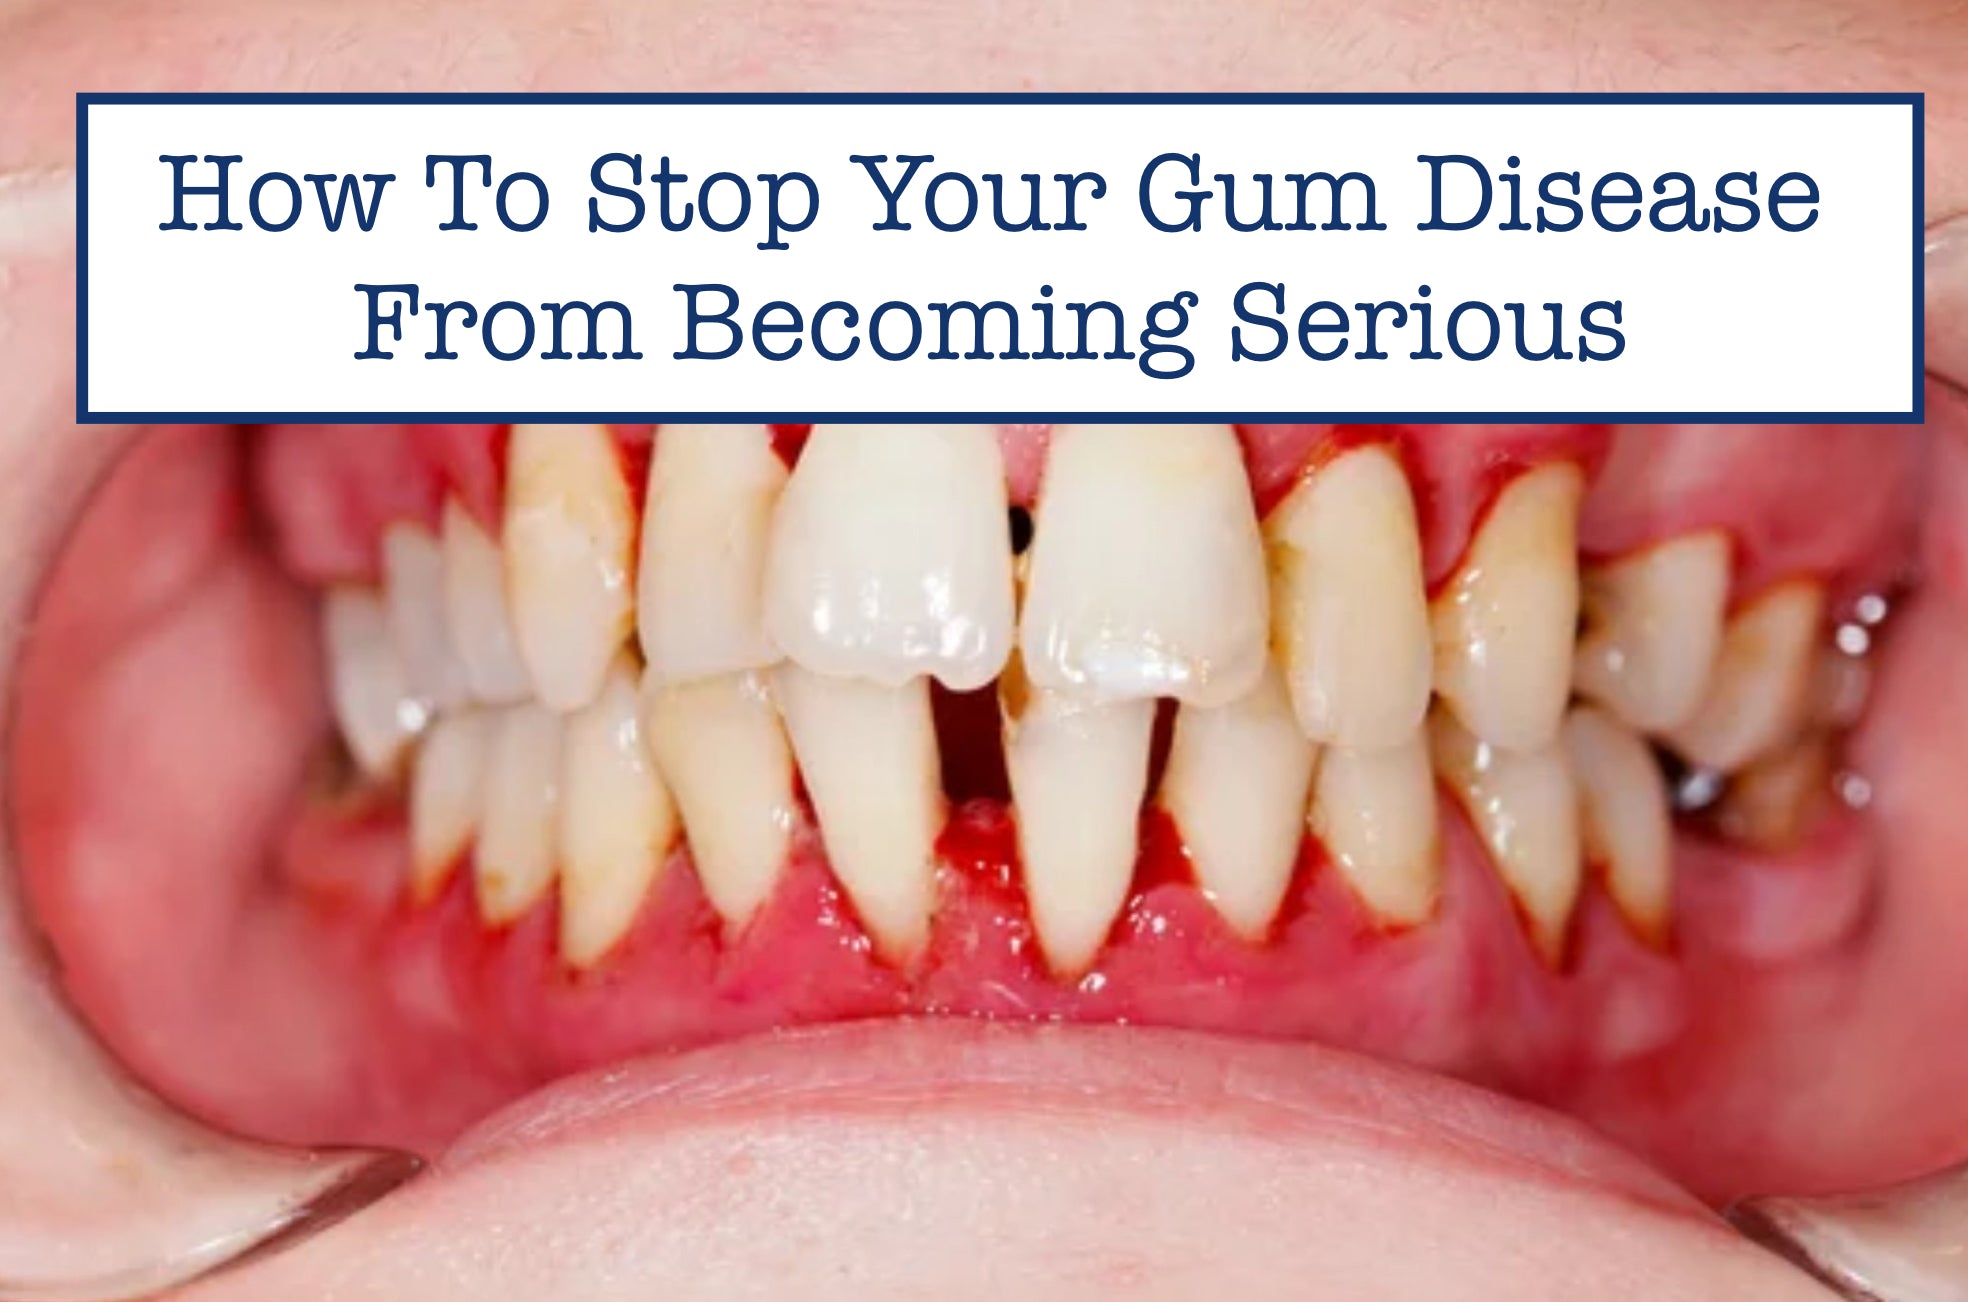 How To Stop Your Gum Disease From Becoming Serious